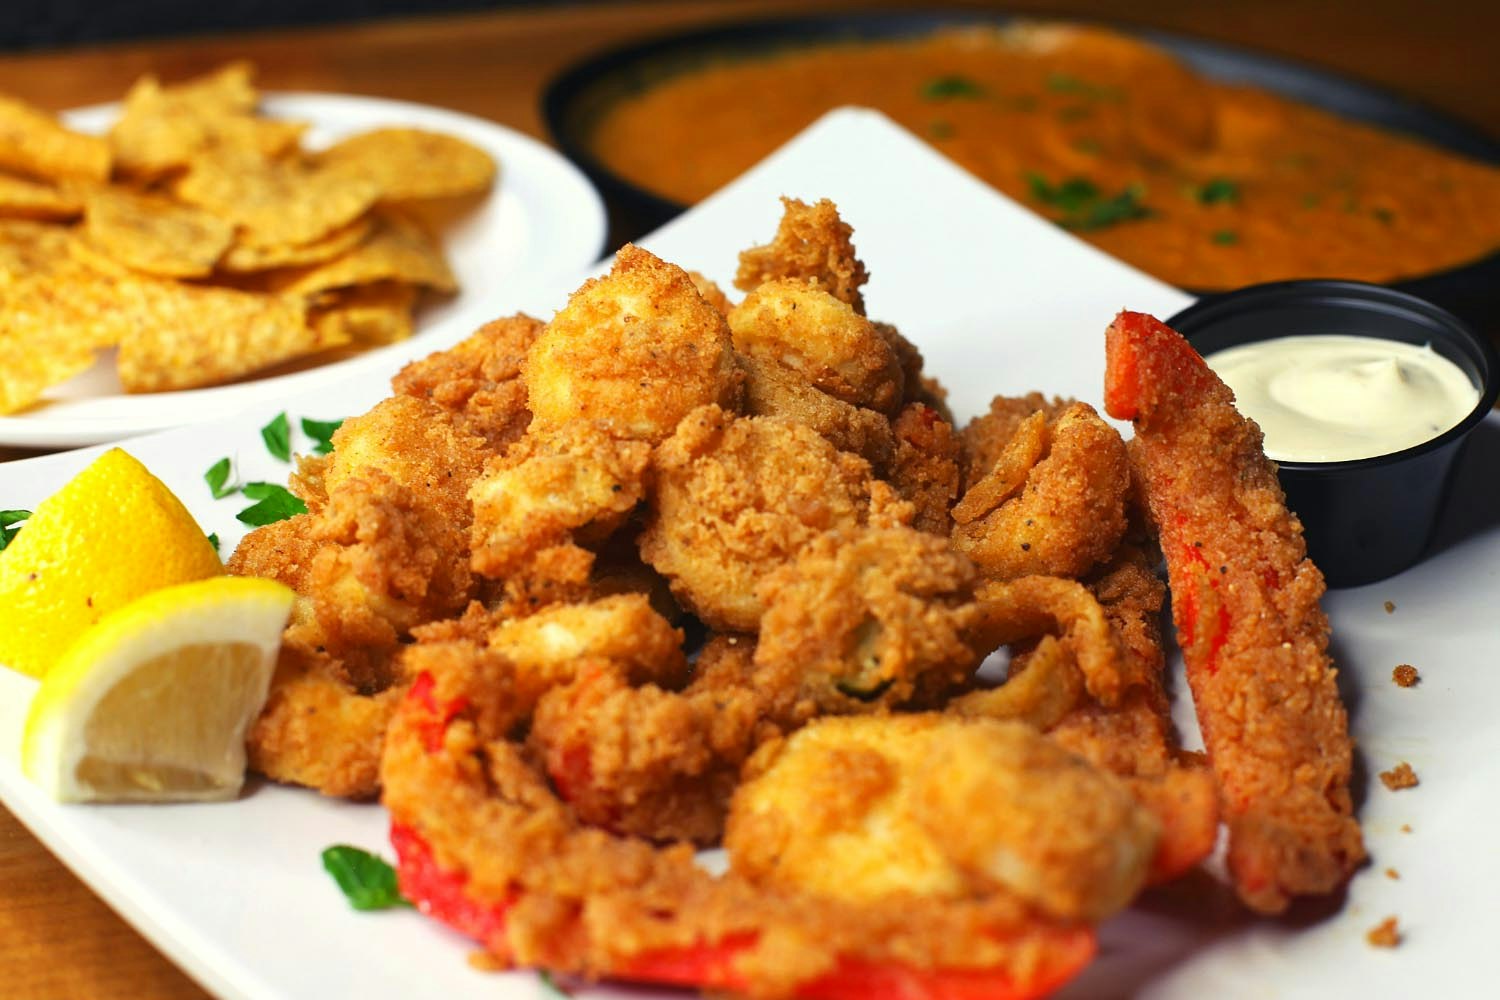 Closeup of a plate of seitan fried 'chicken' with a side of fried red peppers. In the background is a plate of chips and dip; San Francisco Bay Area vegan restaurant 